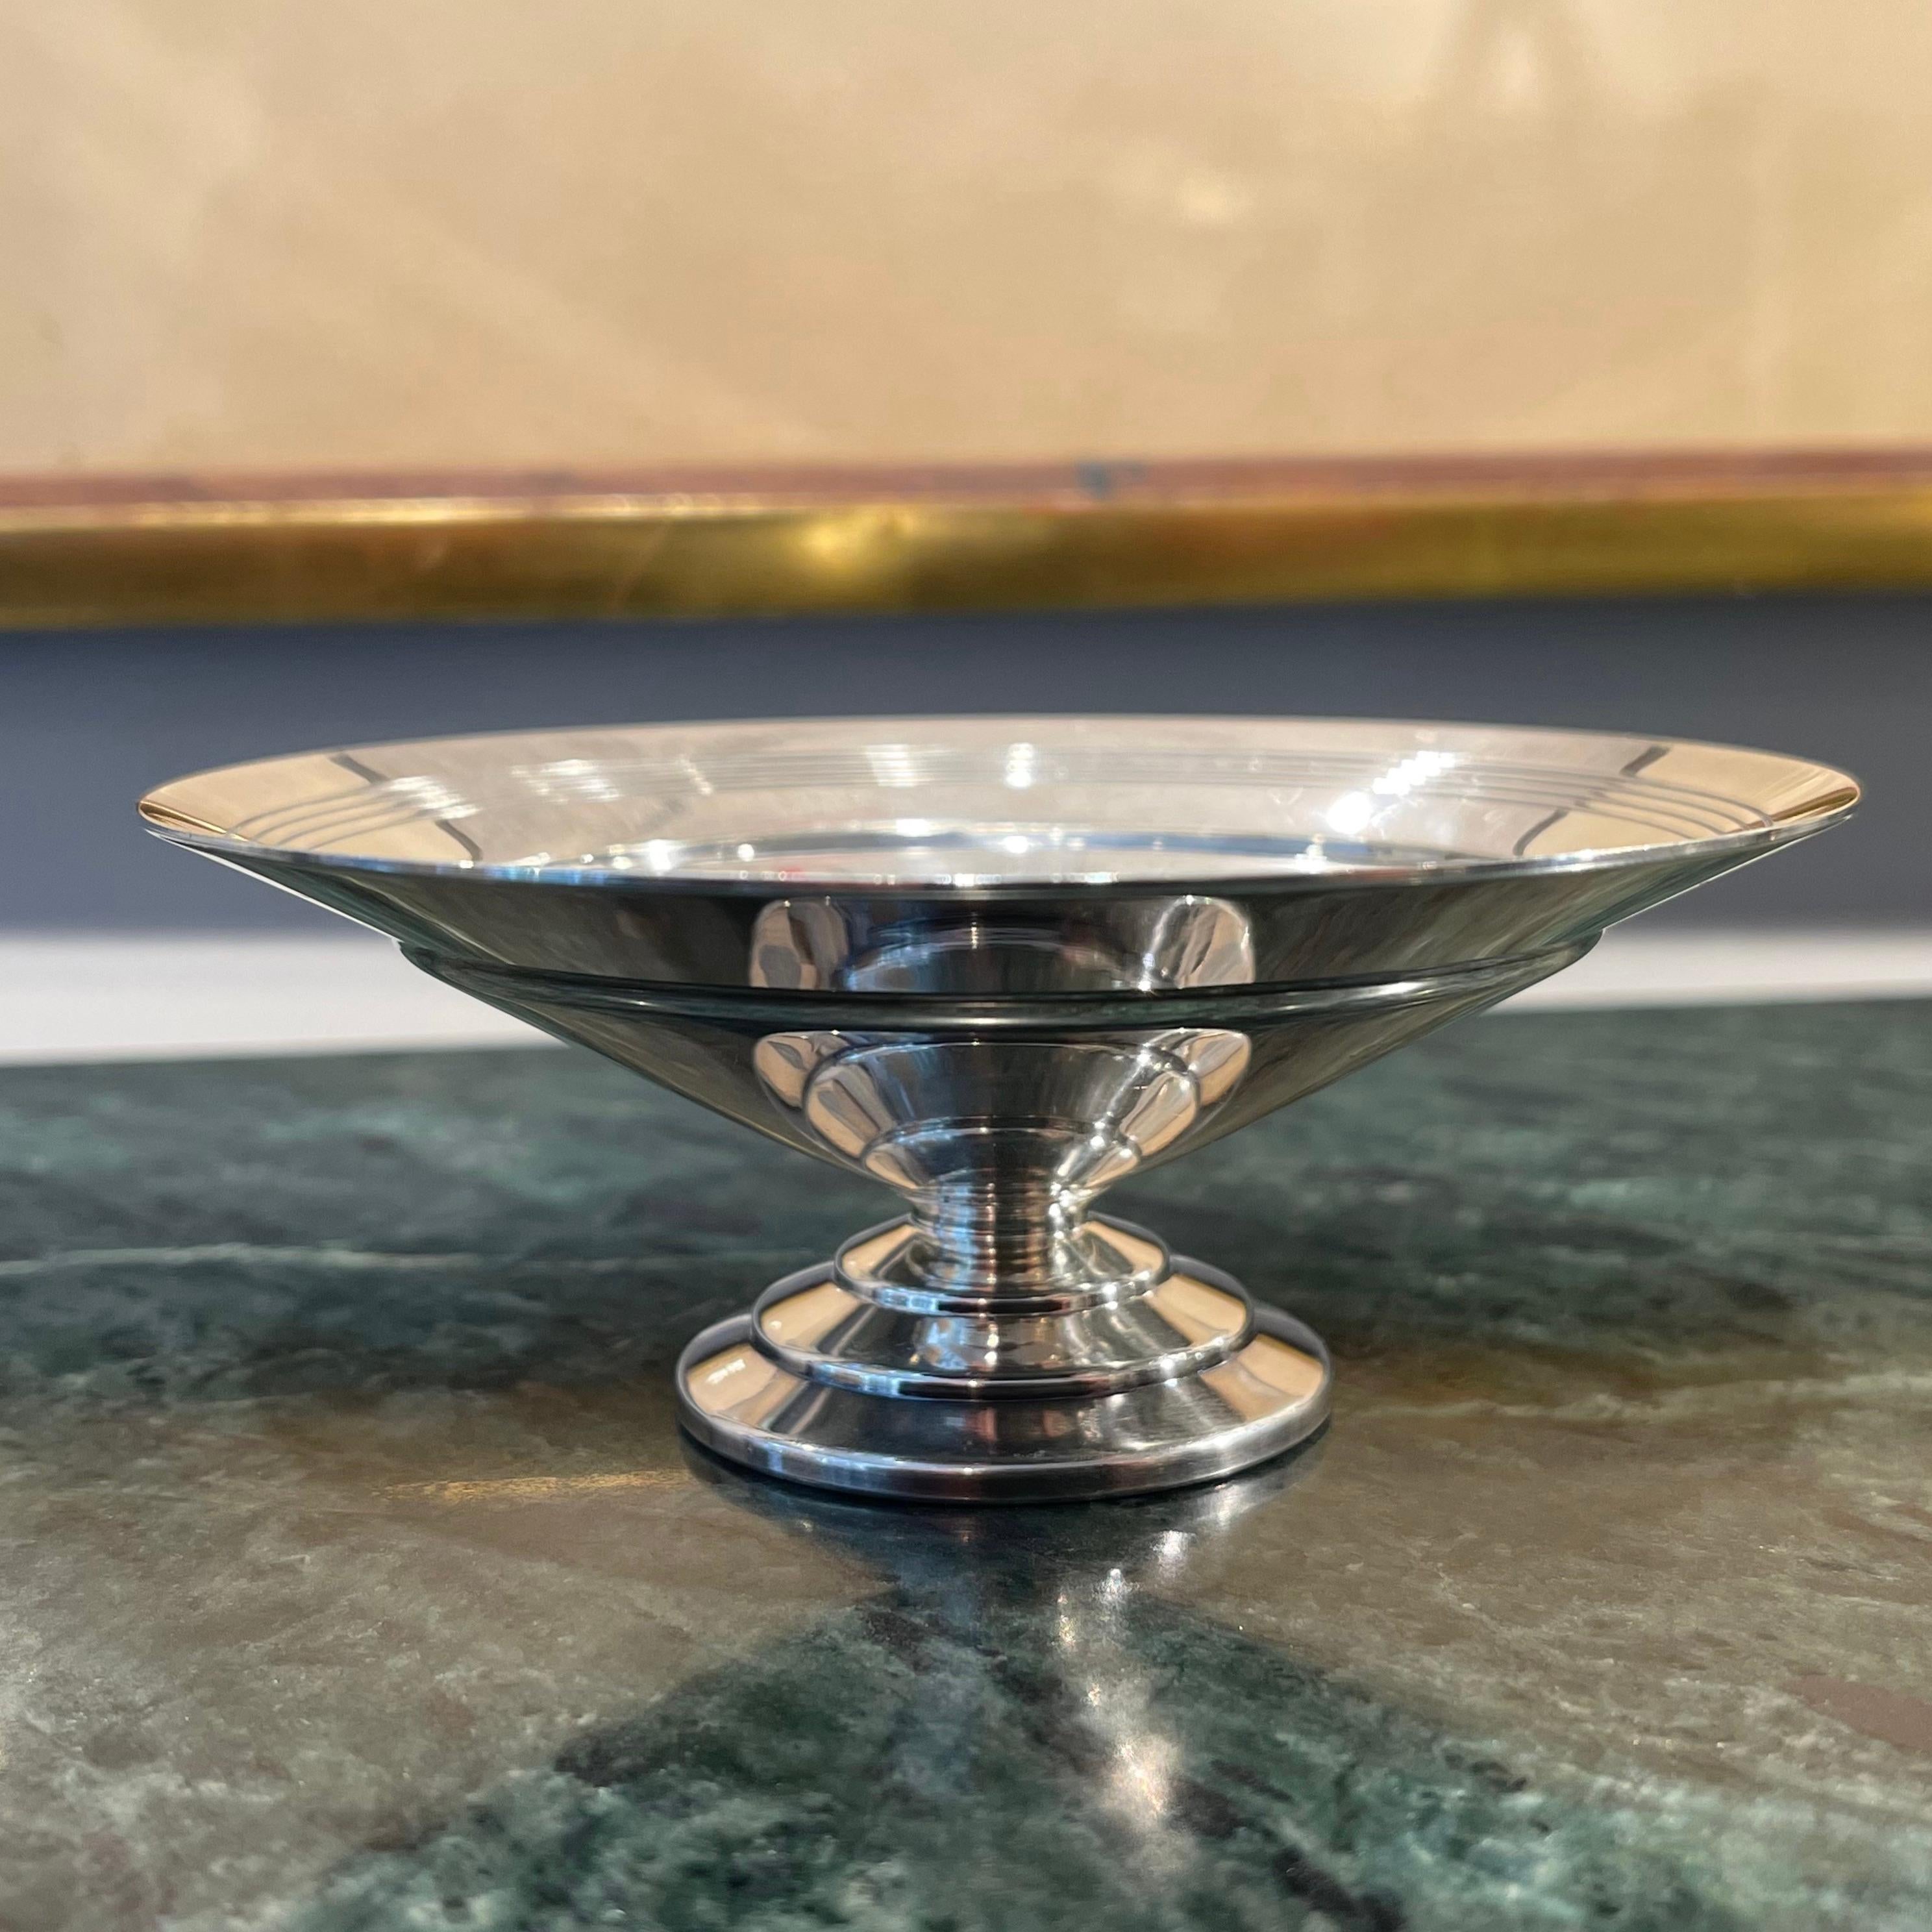 Two 1930s Art Deco Dishes in Prince's Plate by Keith Murray for Mappin & Webb In Good Condition For Sale In London, GB